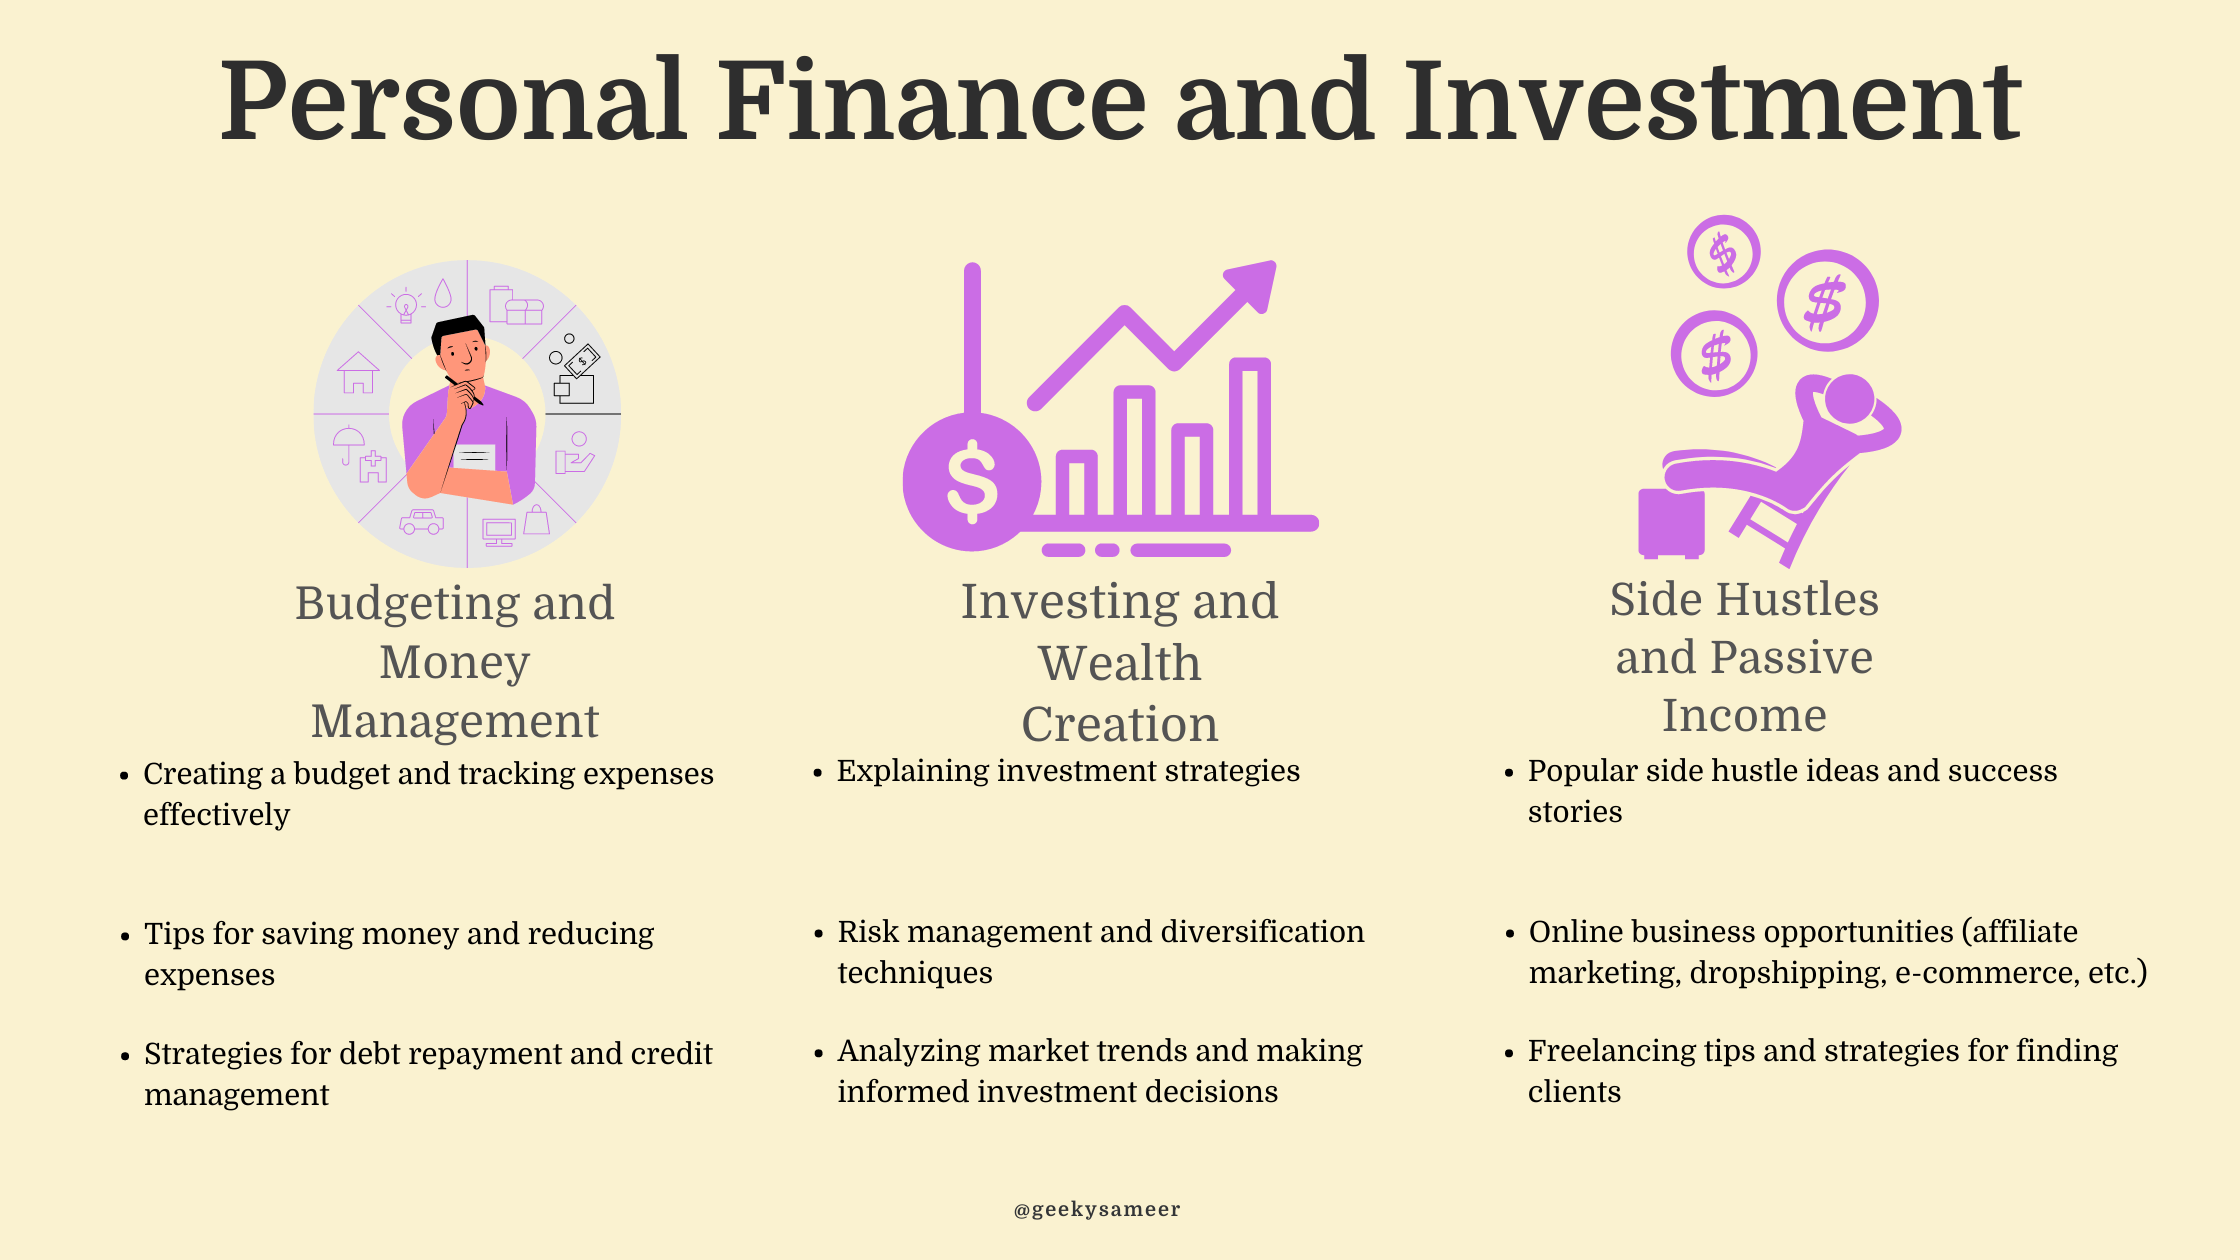 blogging niches for Personal Finance and Investment